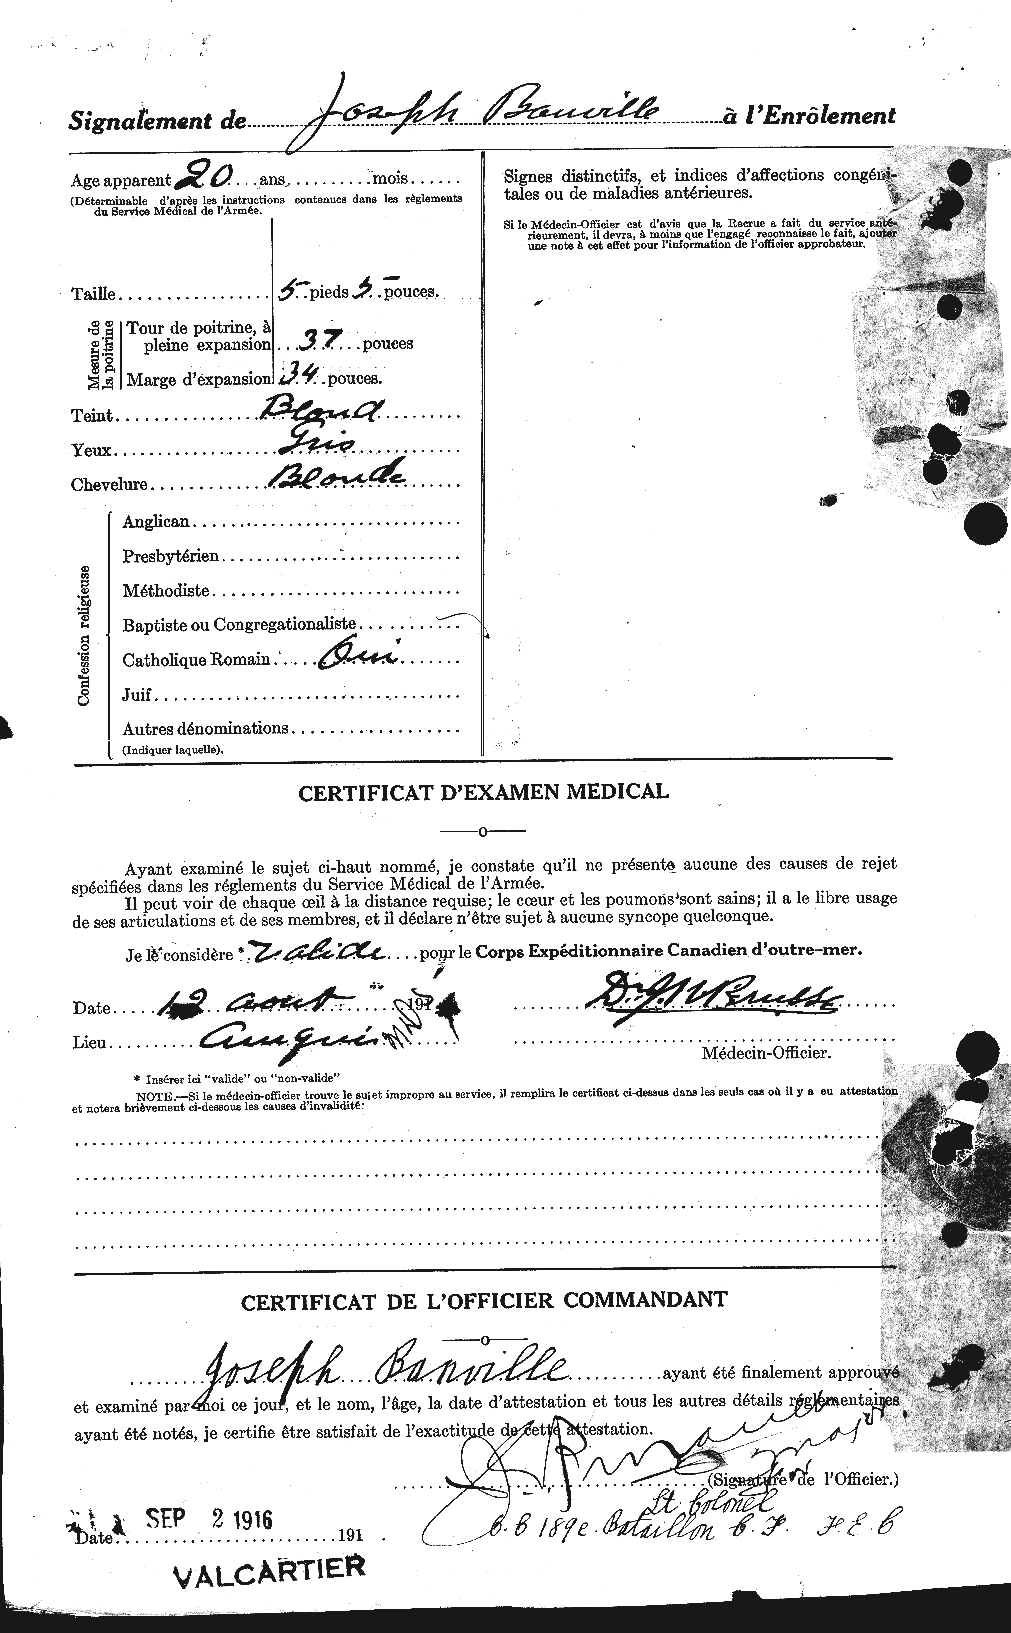 Personnel Records of the First World War - CEF 220580b